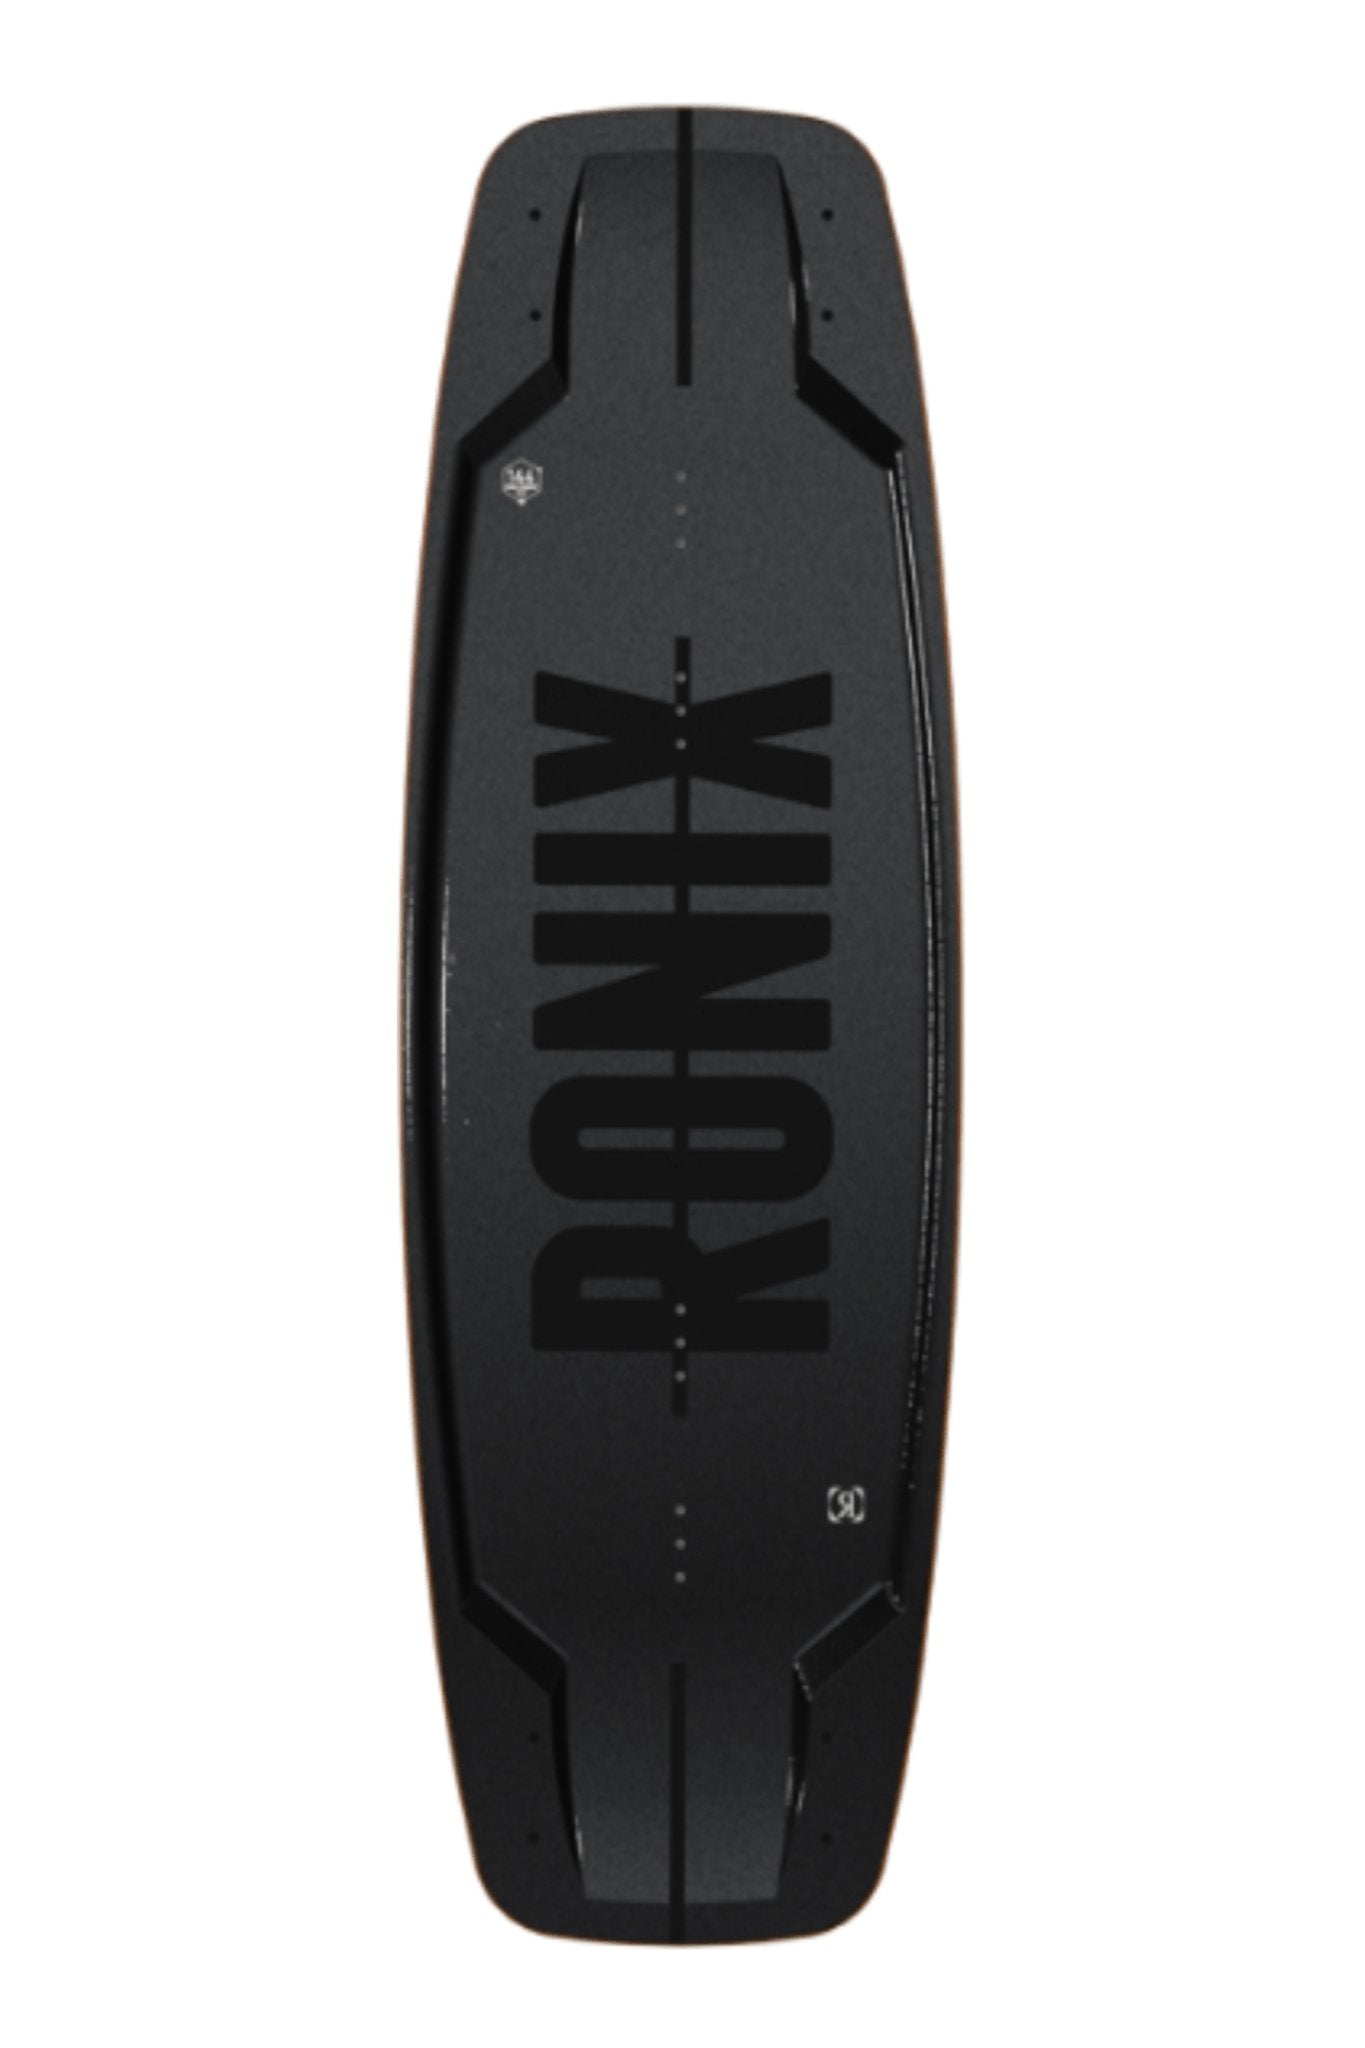 2023 Parks Wakeboard -Ronix232040-135-No Boots-US 6 to 7